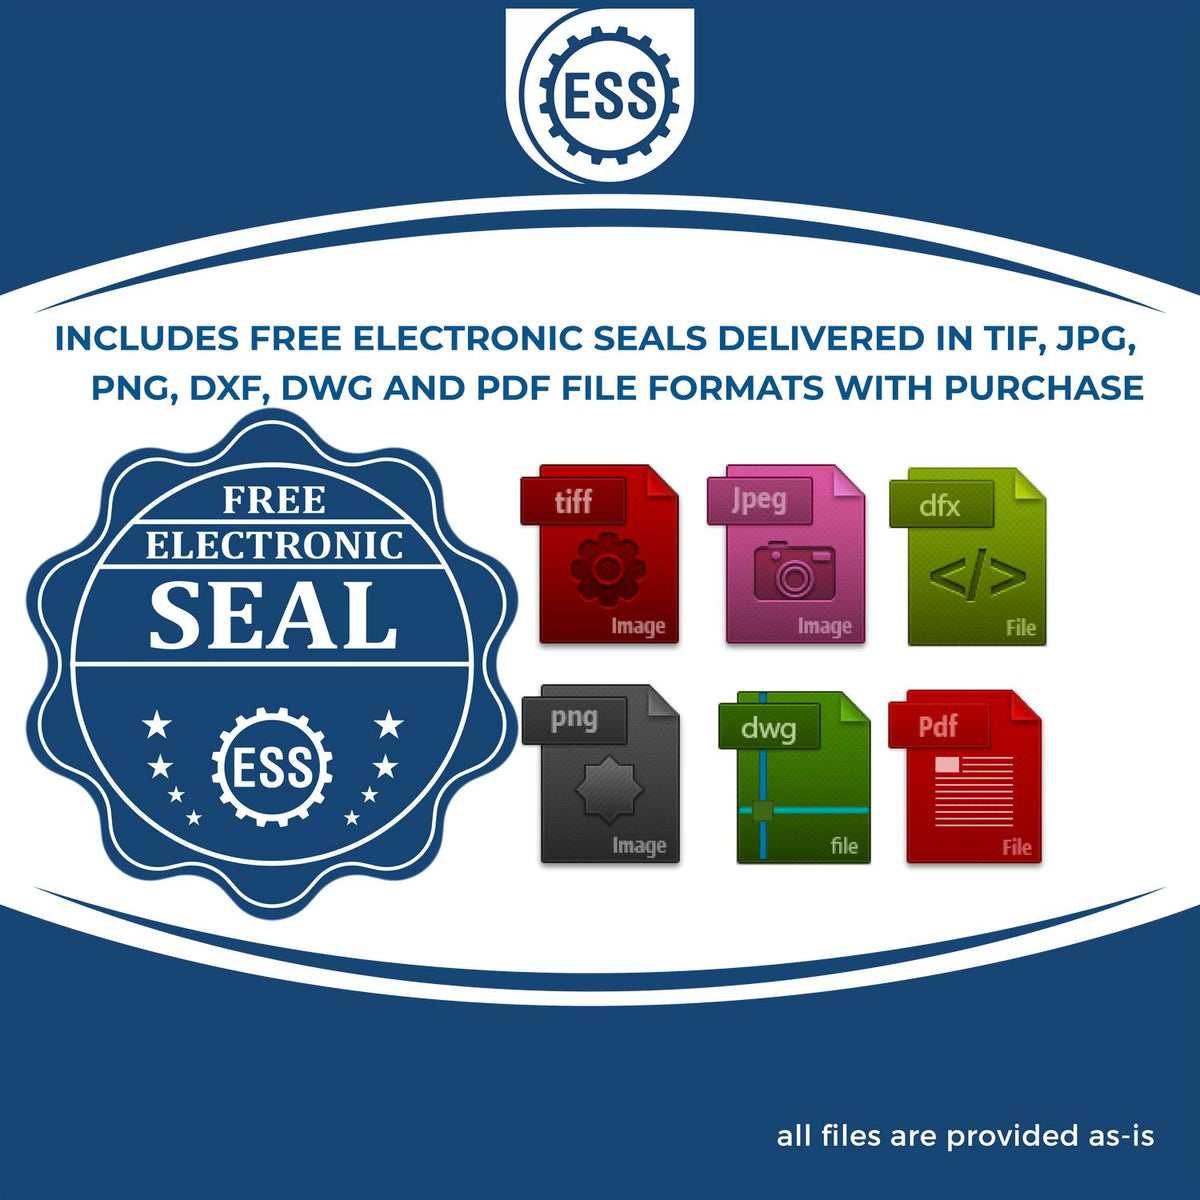 An infographic for the free electronic seal for the Soft Delaware Professional Geologist Seal illustrating the different file type icons such as DXF, DWG, TIF, JPG and PNG.